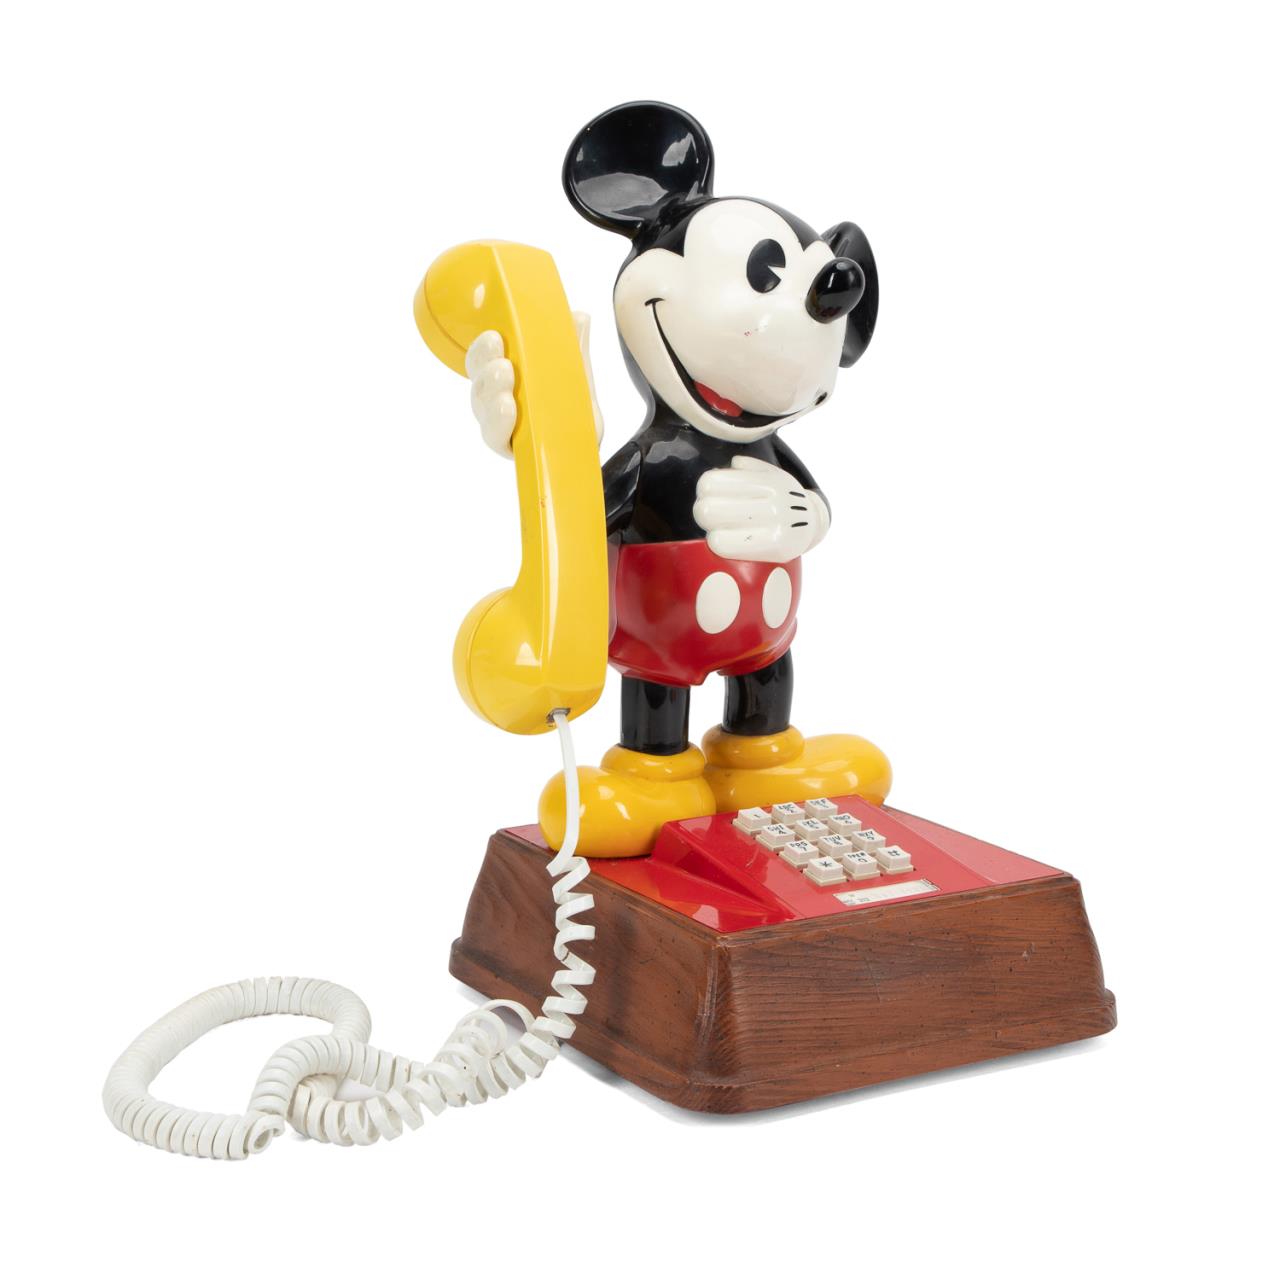 THE MICKEY MOUSE PHONE CIRCA 1976 29f5a7